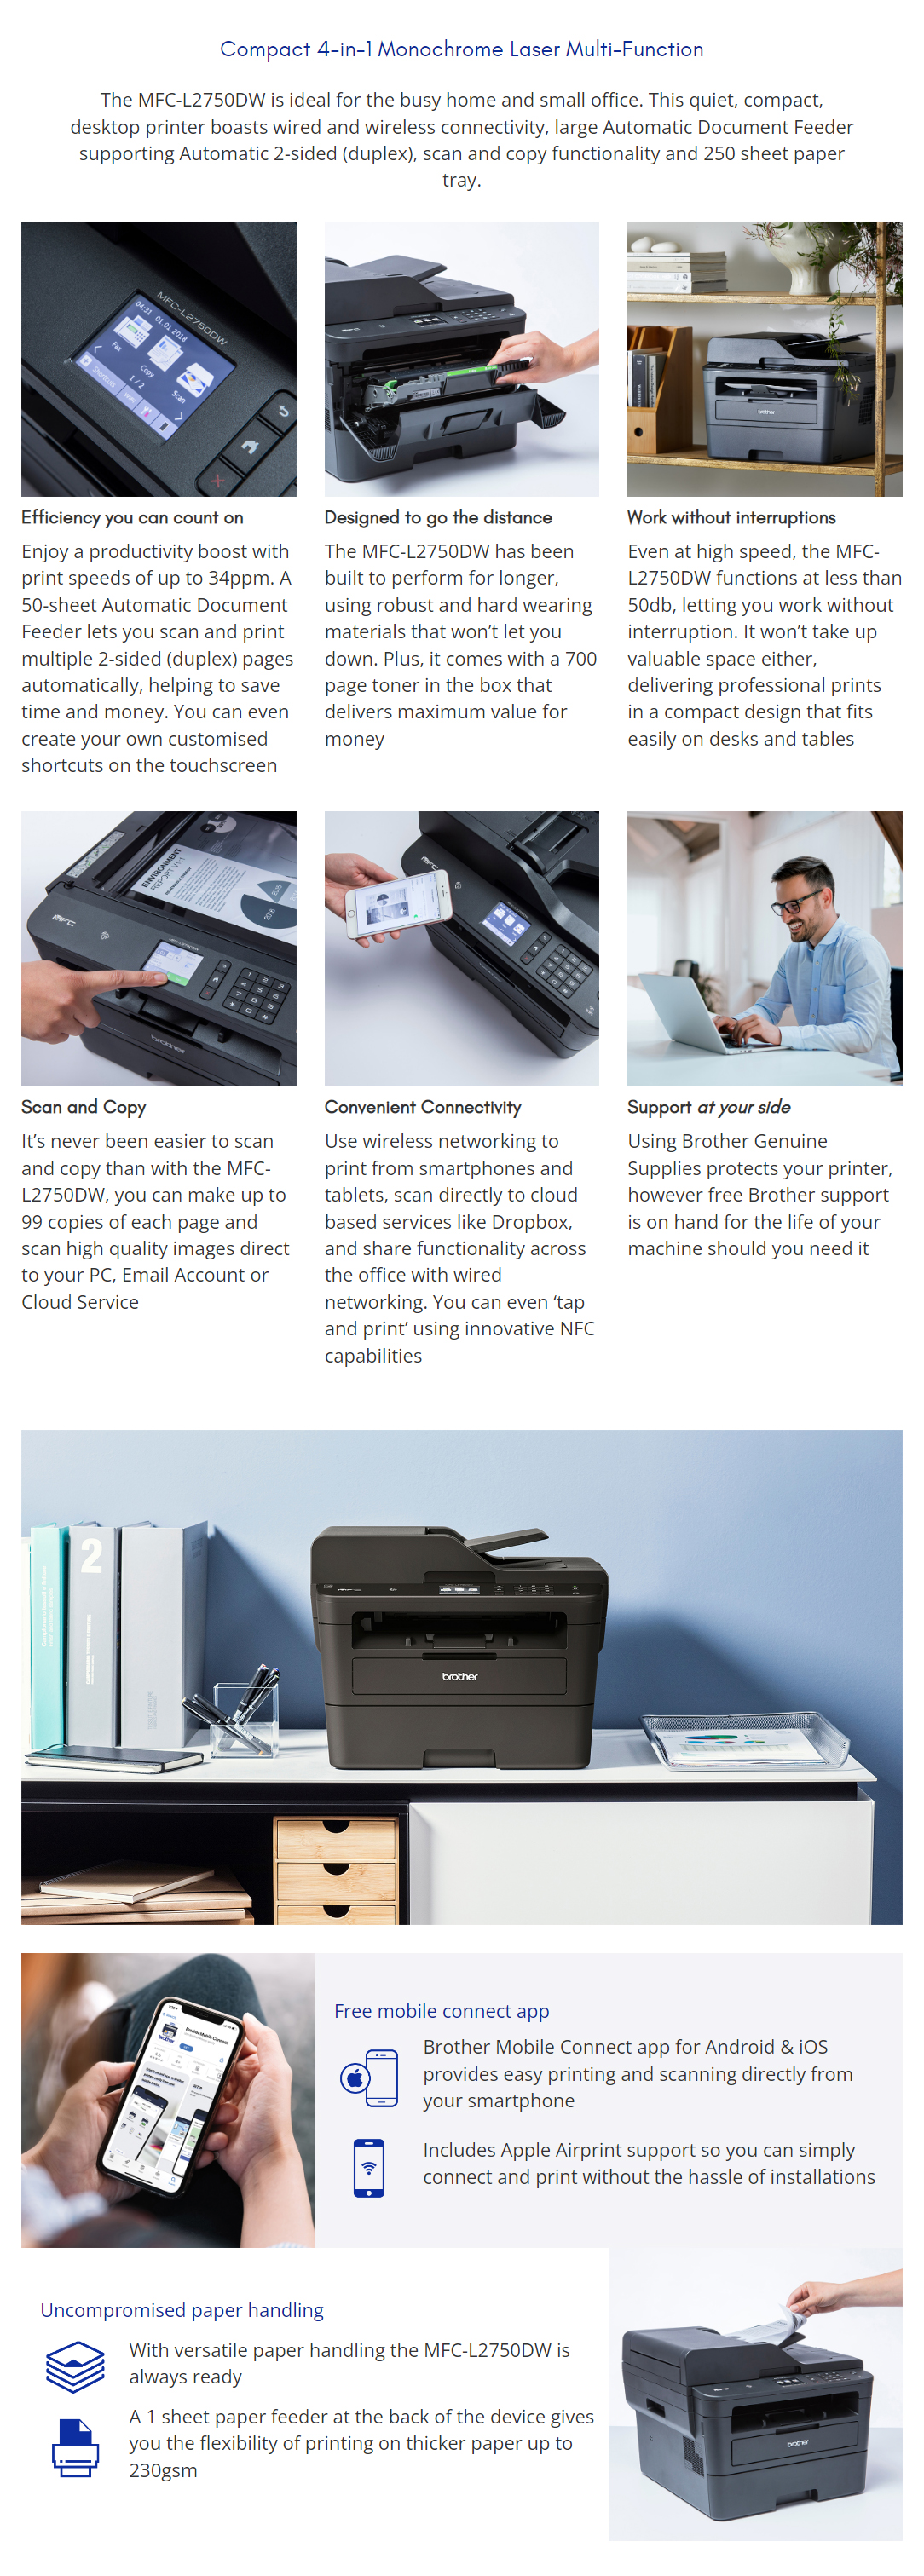 Multifunction-Printers-Brother-MFC-L2750DW-Laser-Multifunction-1